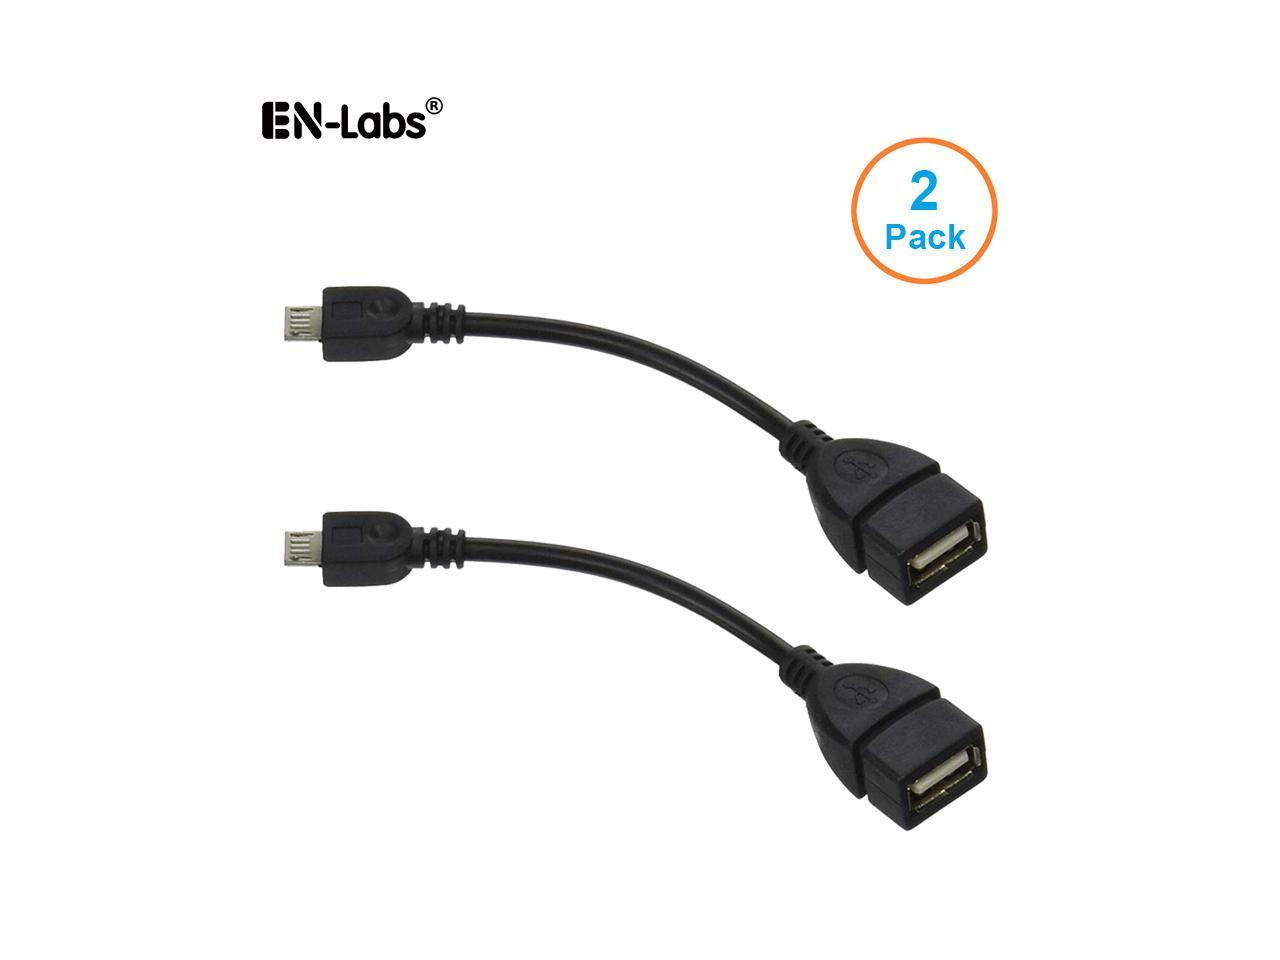 PRO OTG Power Cable Works for BLU Studio One Plus with Power Connect to Any Compatible USB Accessory with MicroUSB